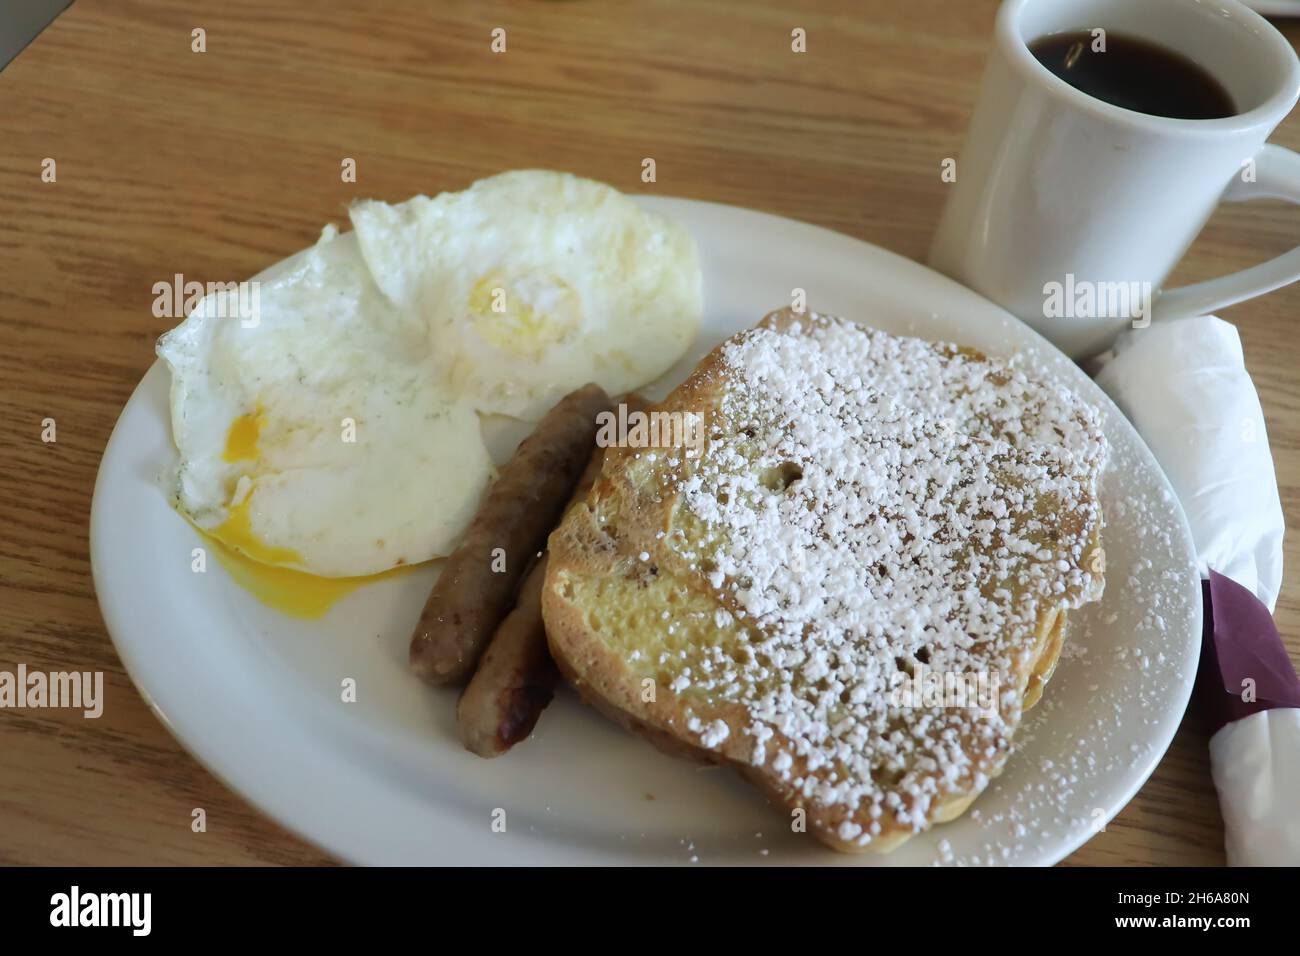 Scrumptious looking french toast topped with powdered sugar eggs over easy and sausages on the side with coffee Stock Photo